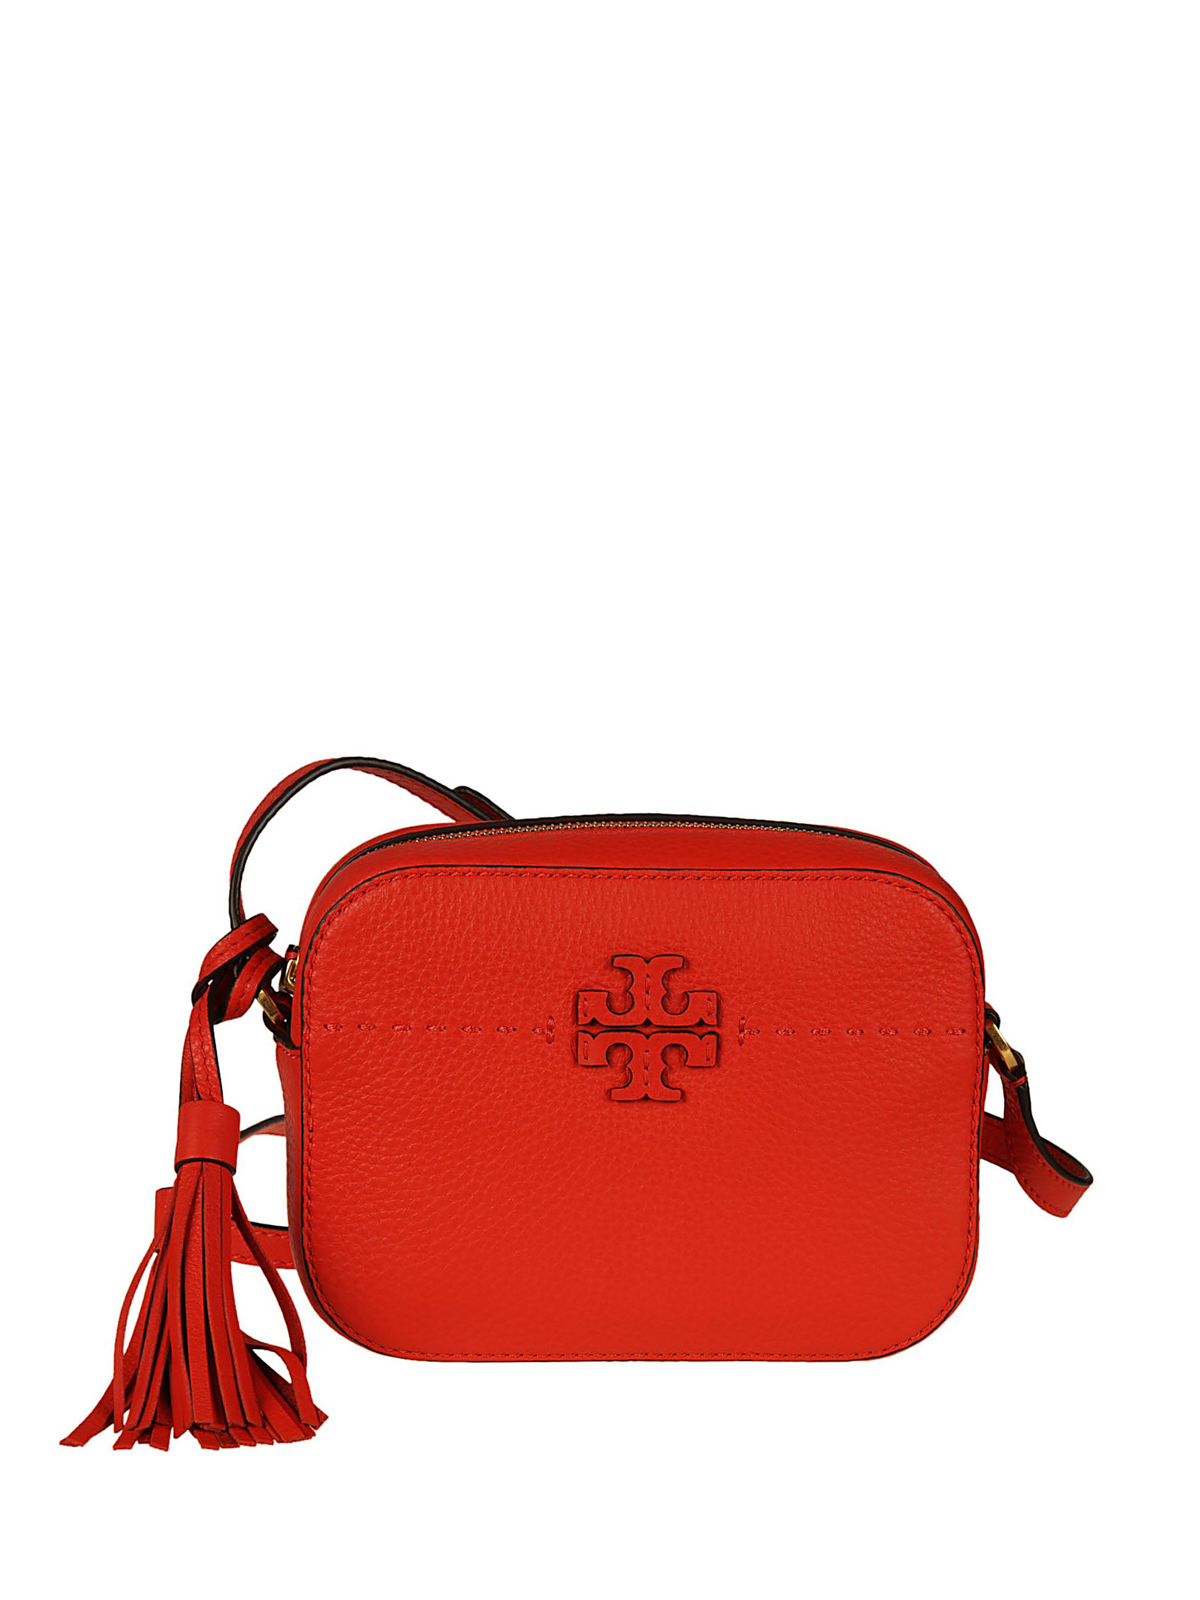 Cross body bags Tory Burch - McGraw red leather camera bag - 45135614